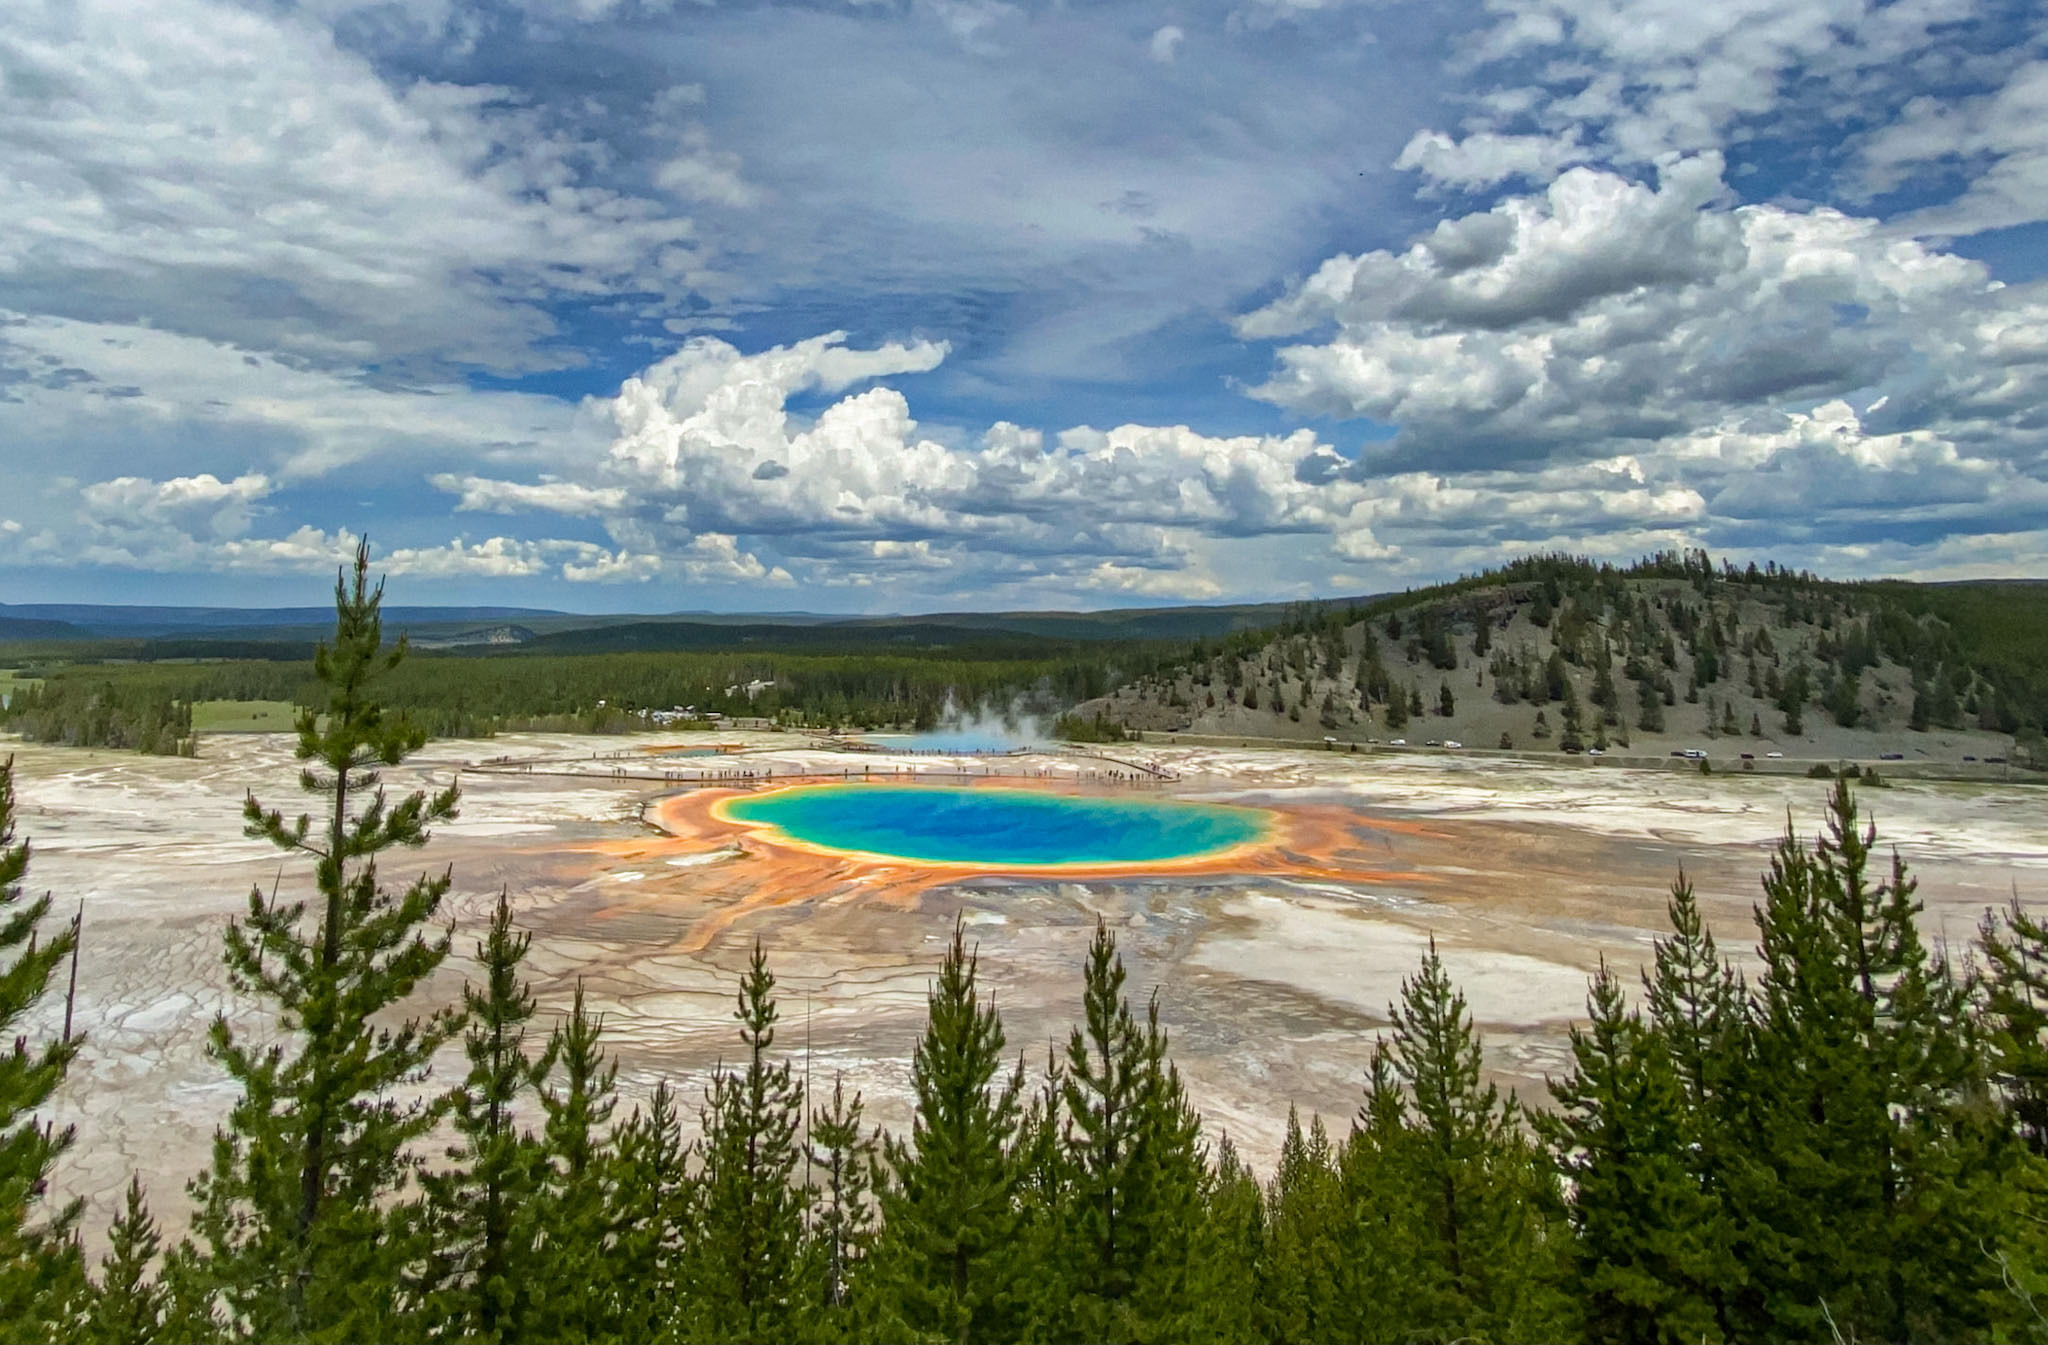 Basin of water surrounded by first, nothingness, then hills and tall trees. Around the basin is a ring of rainbow colors.